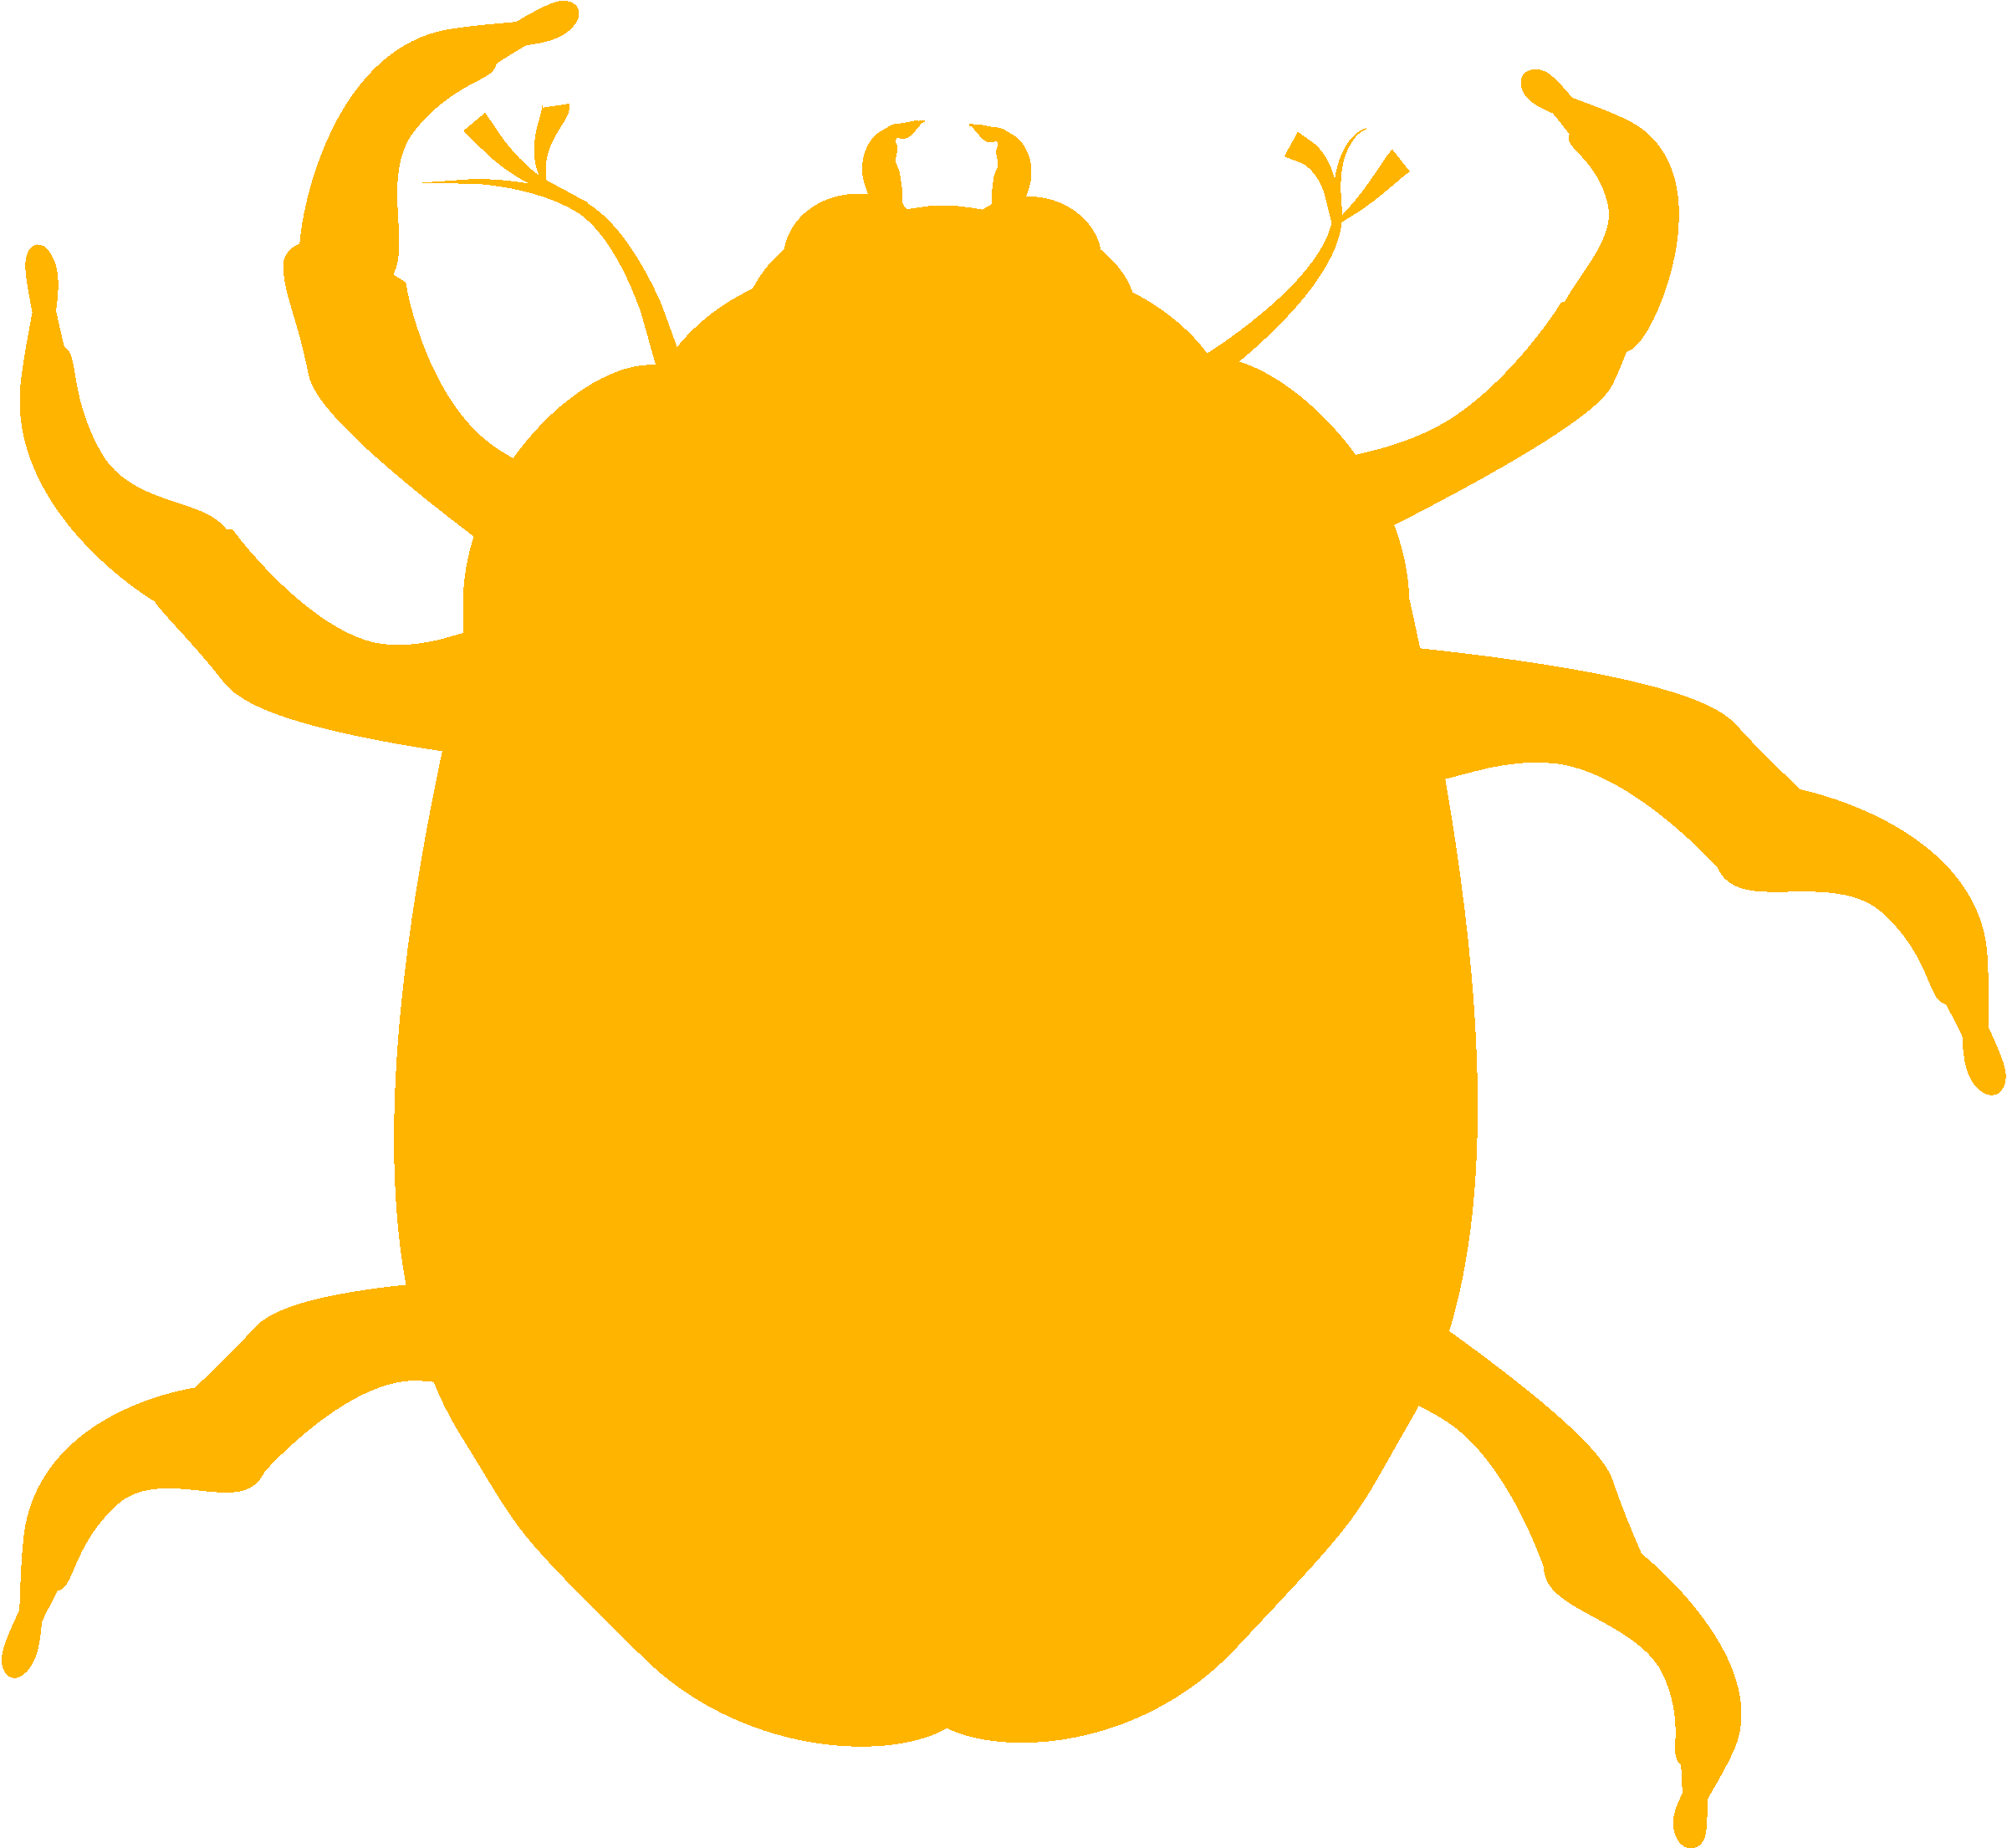 The Card Suits Are Correct, But Why Aren't The Colors - Junebug Sticker (2400x2210)